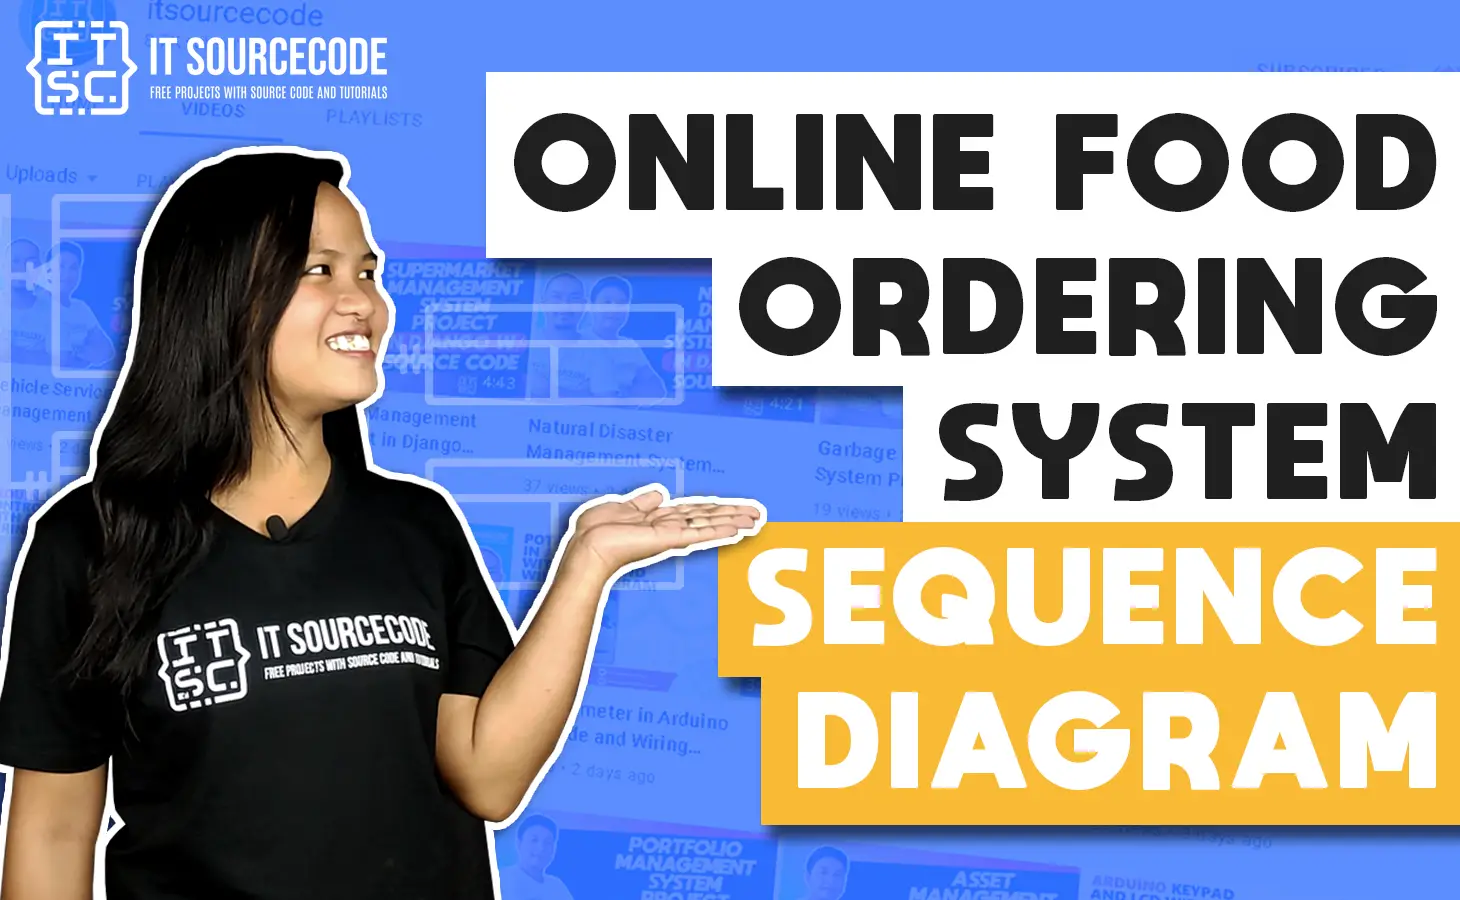 Sequence Diagram for Online Food Ordering System